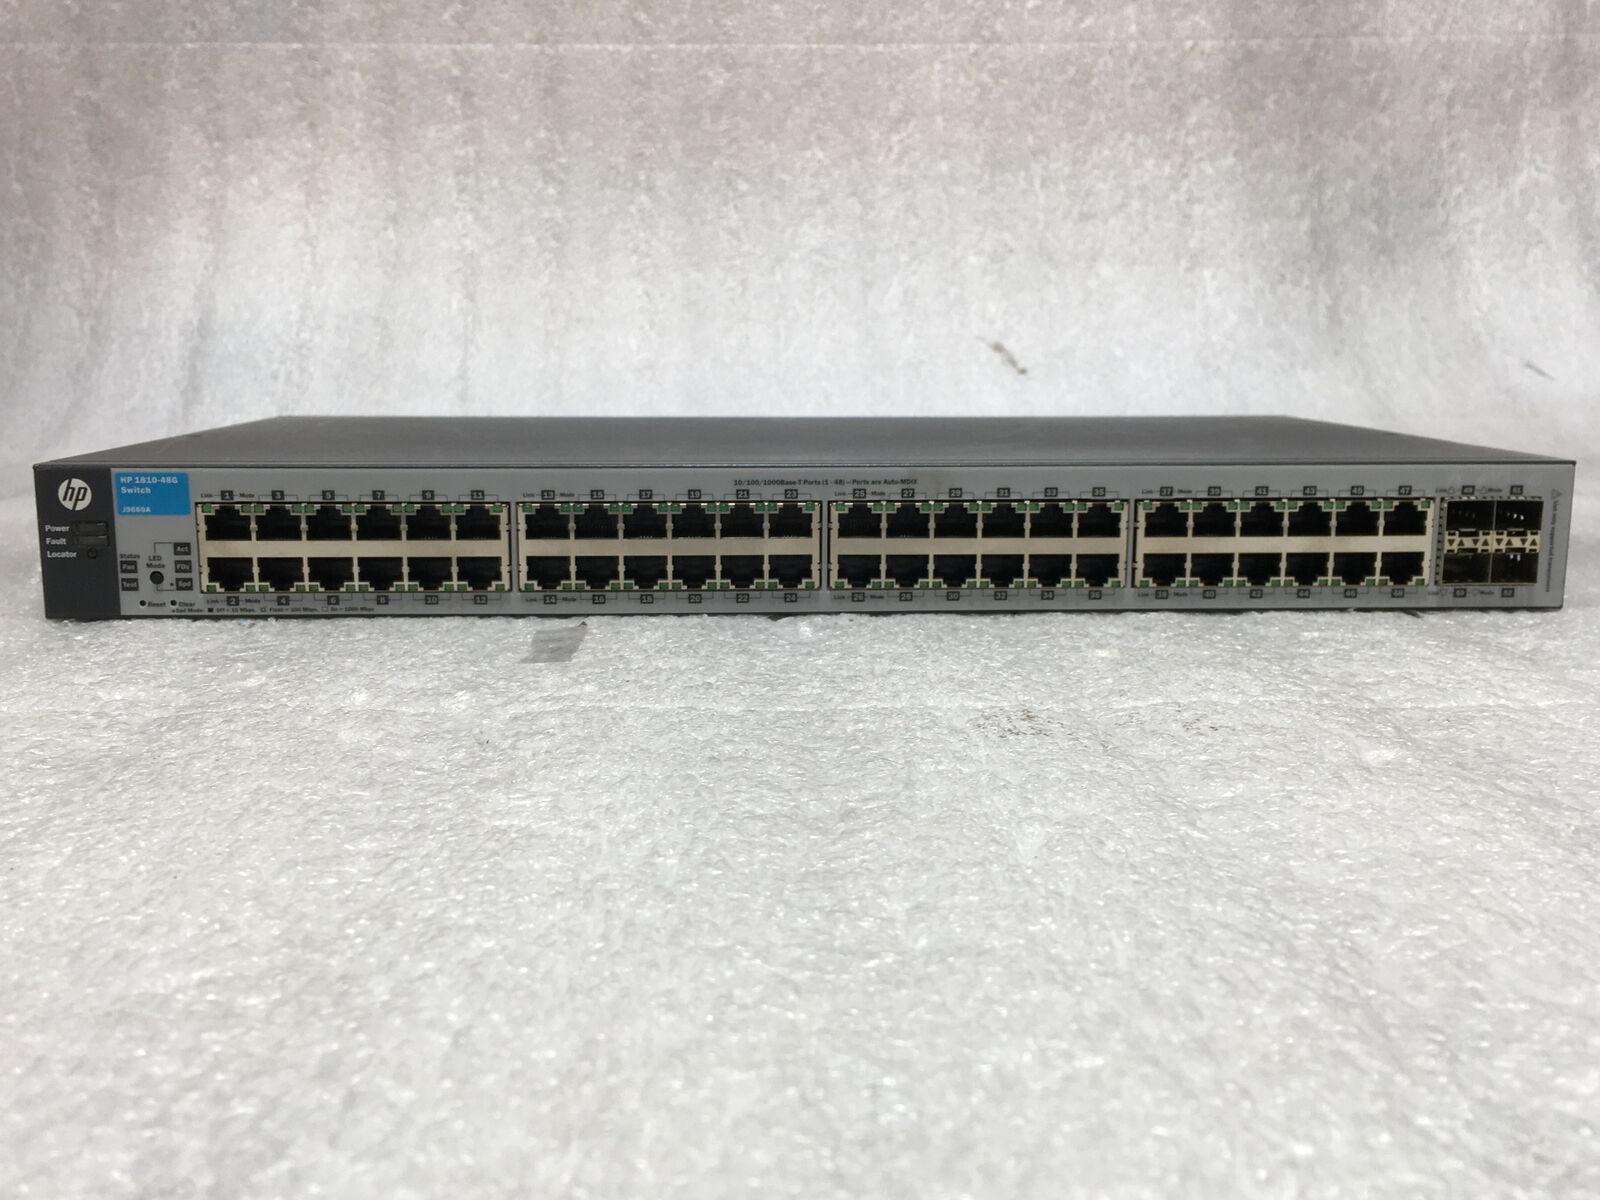 HP 1810-48G J9660A 48 Port Fast Ethernet Network Switch Good Condition